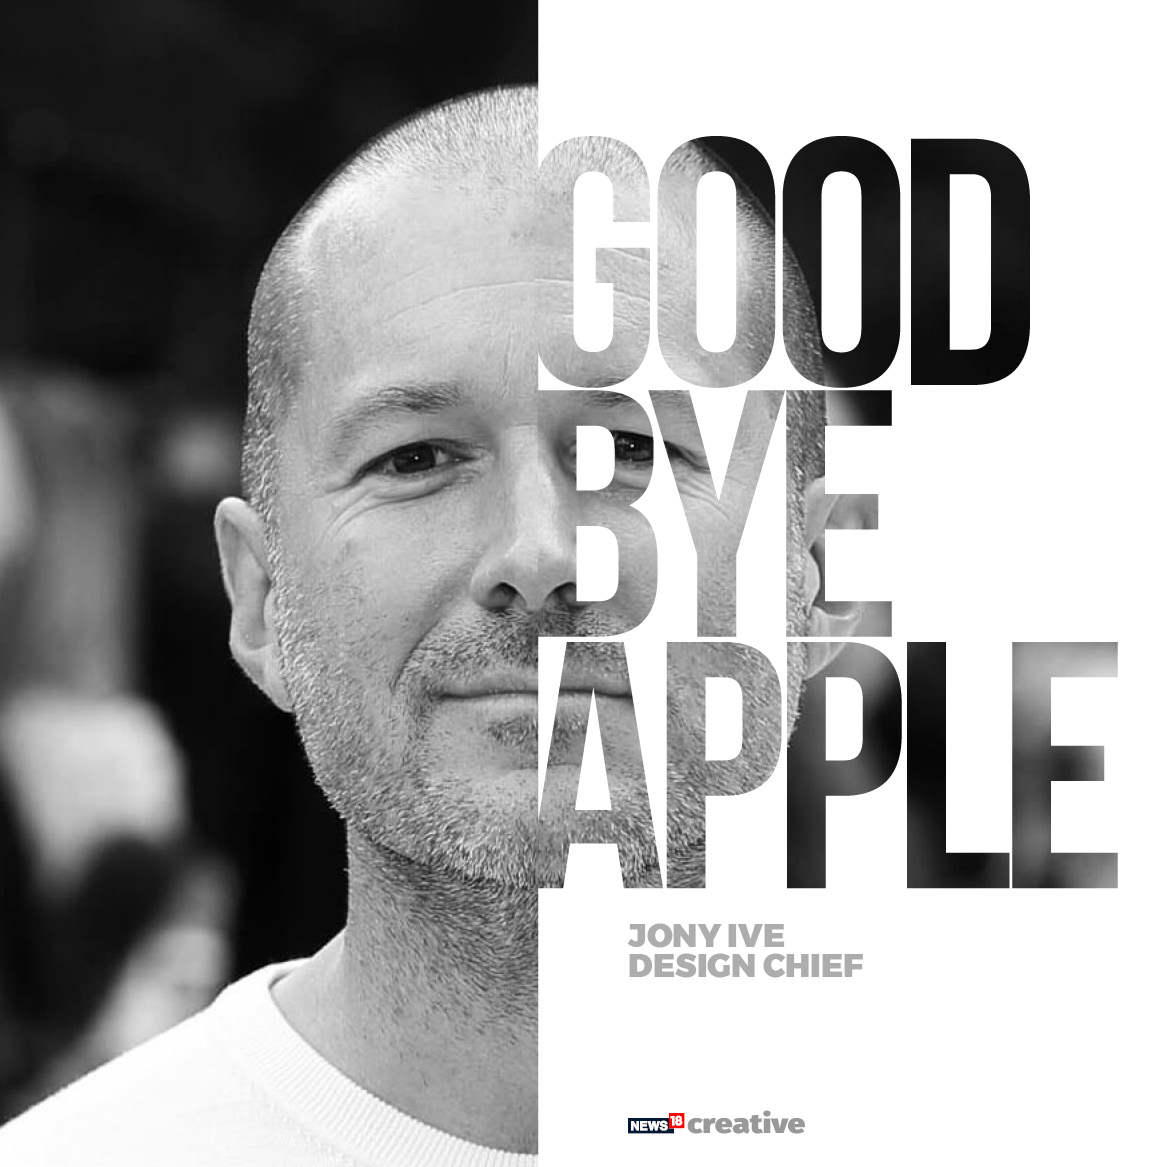 Jonathan Ive has been working with Apple since 1992. 